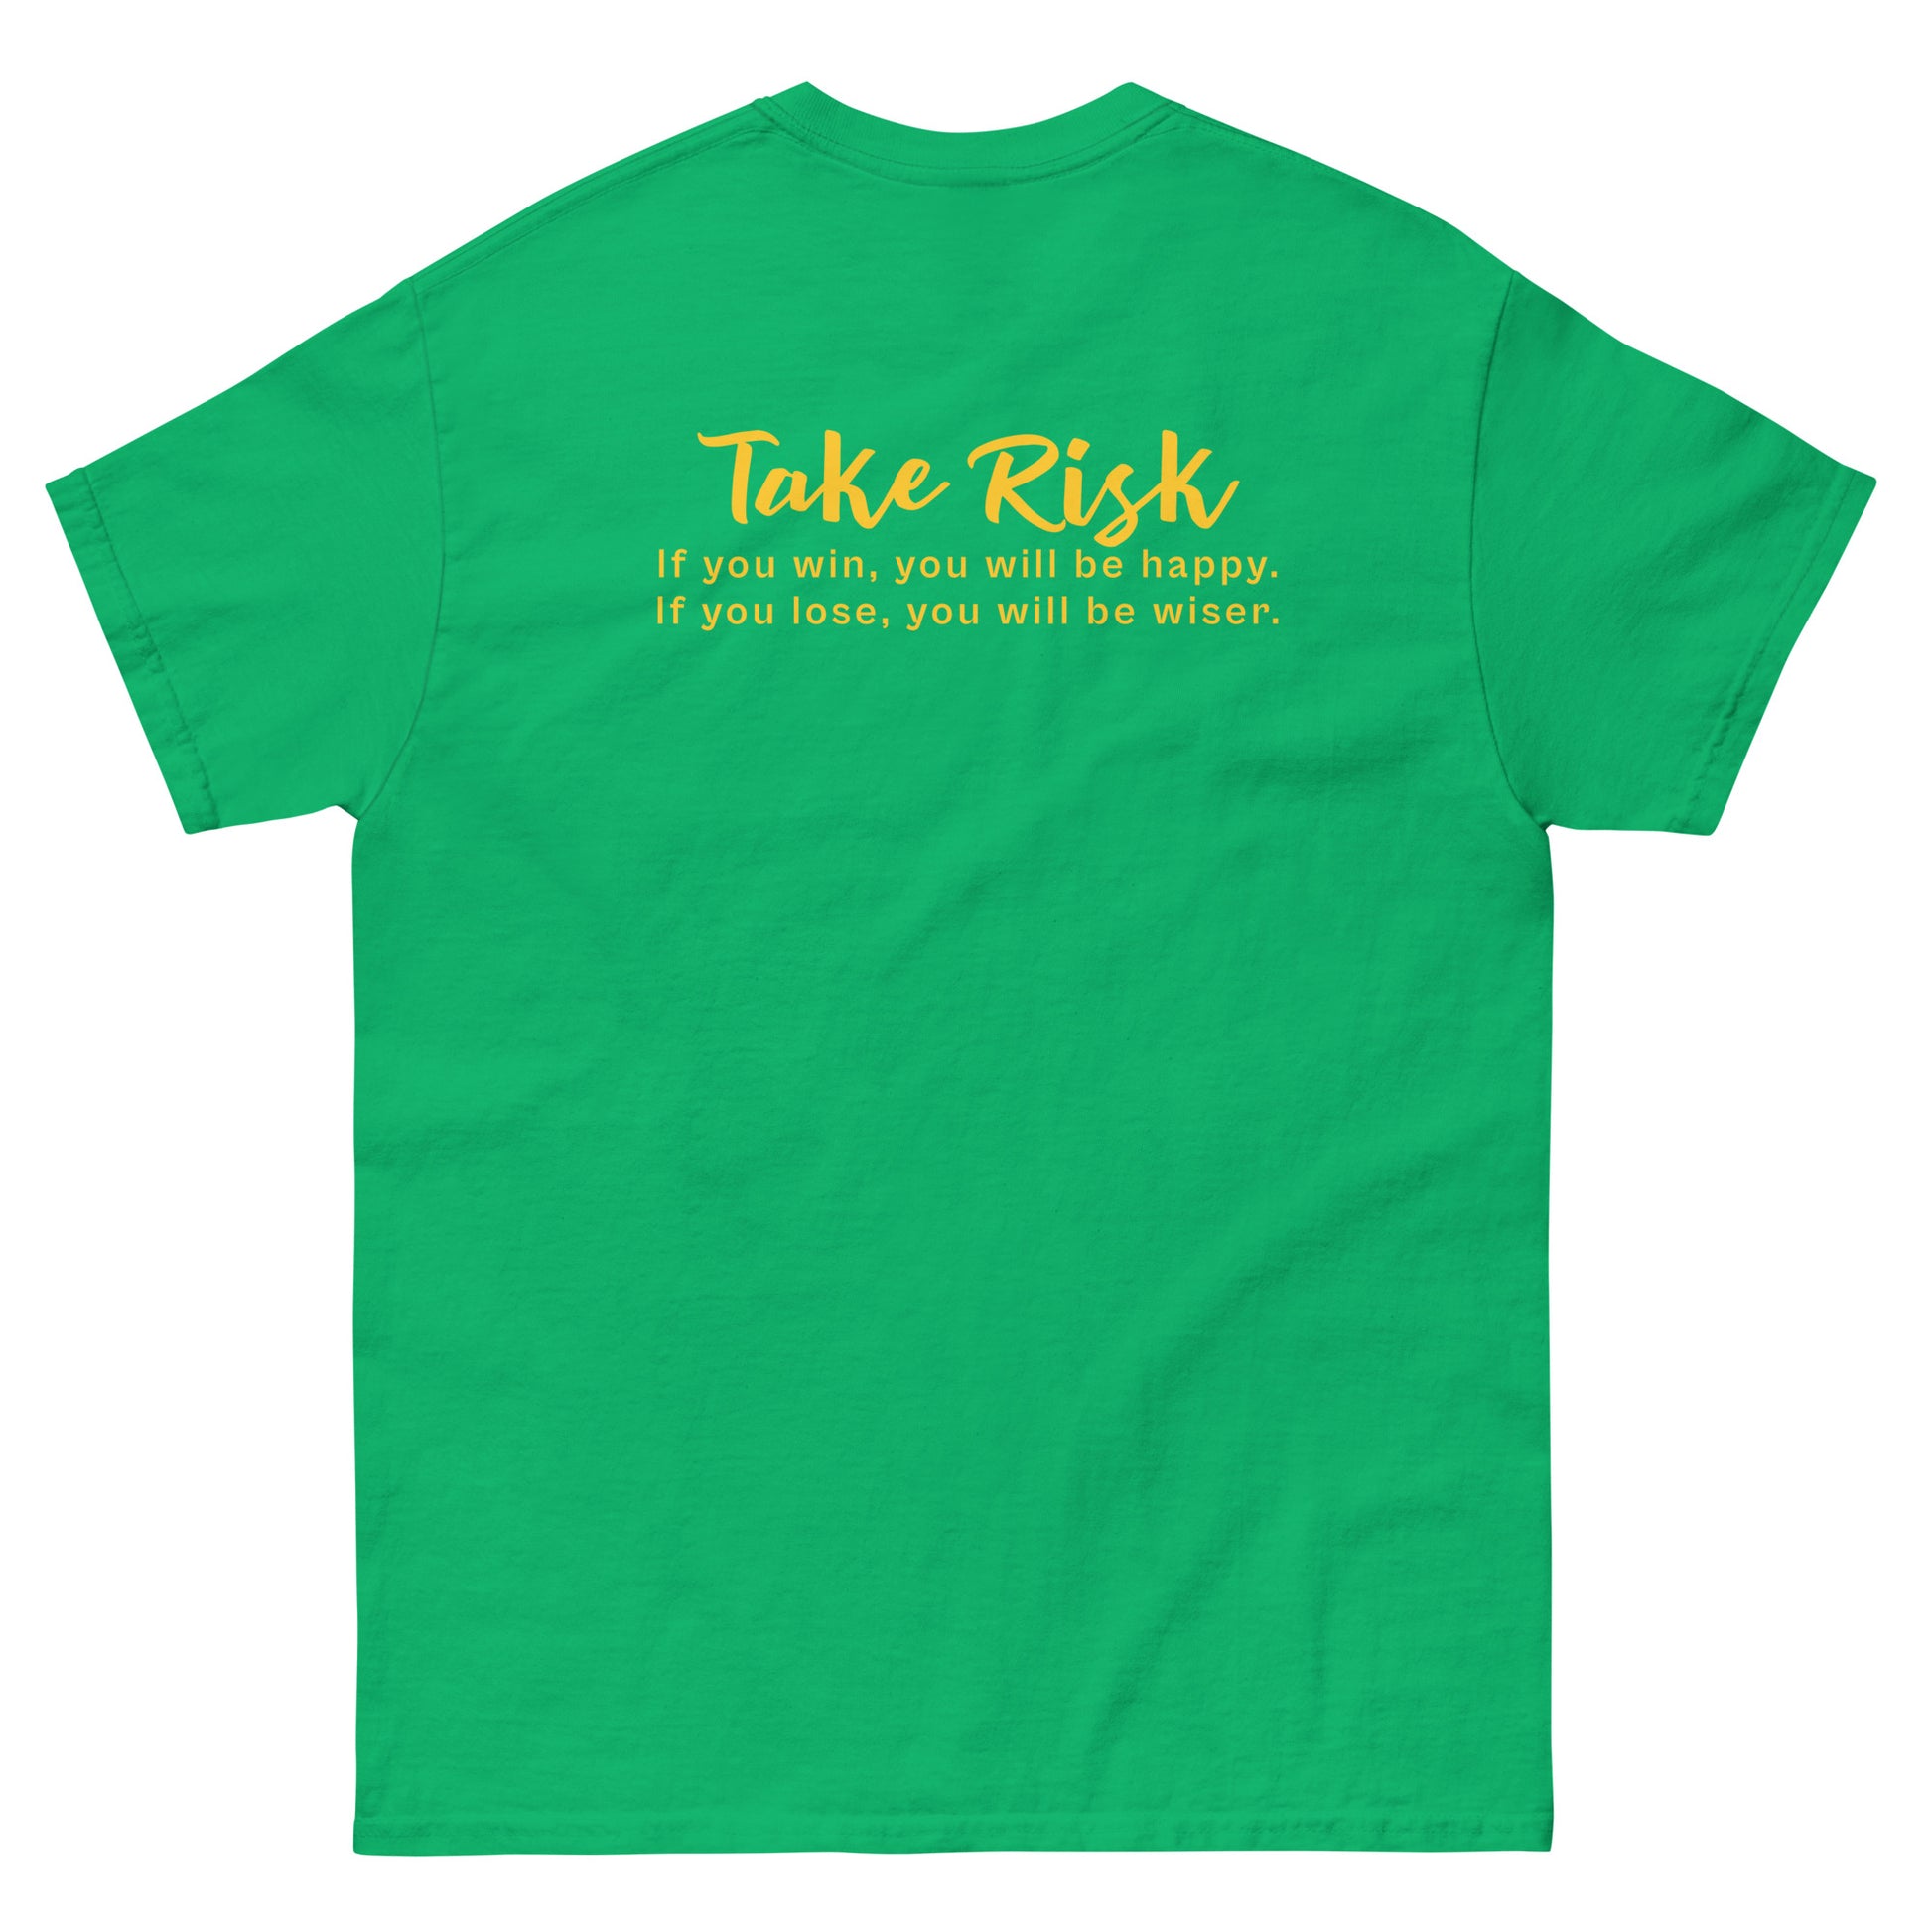 Green High Quality Tee - Front Design with "Take Risk, if you win you will be happy, if you lose you will be wiser." print and an UFO print on left chest - Back Design with a Phrase "Take Risk, if you win you will be happy, if you lose you will be wiser." print